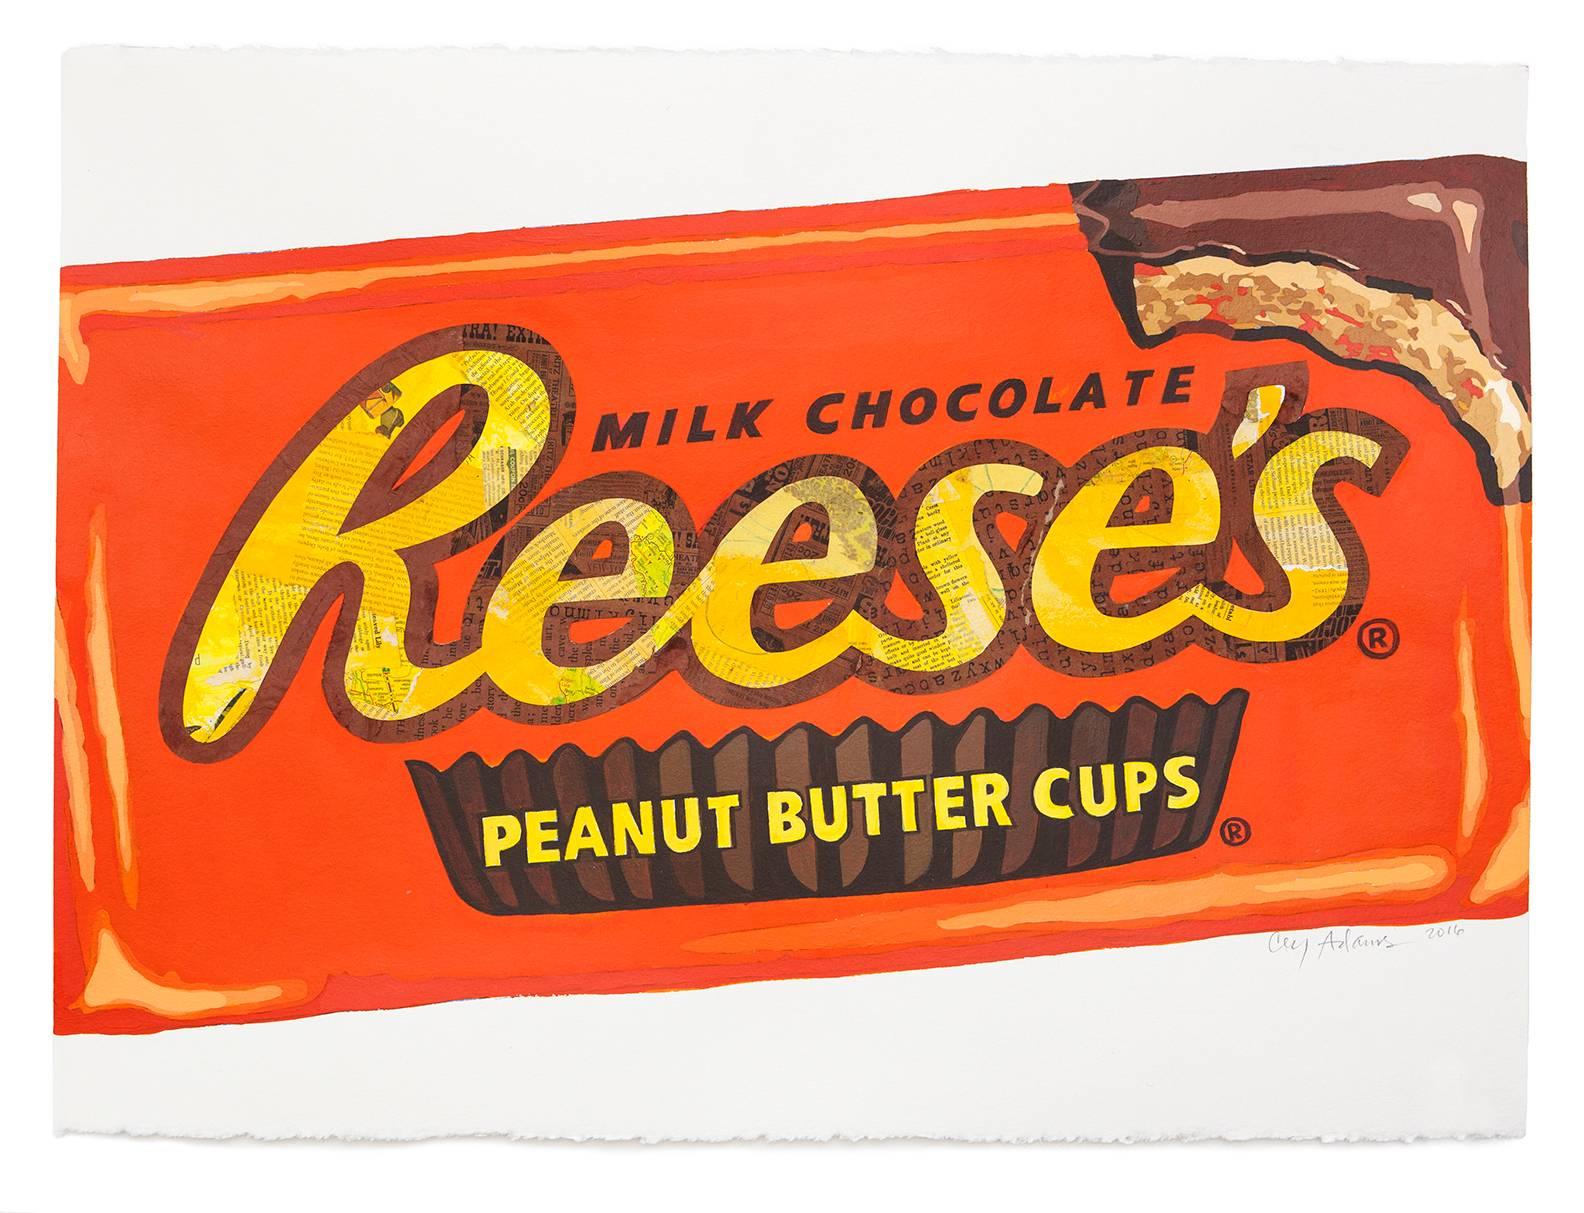 Reese's - Mixed Media Art by Cey Adams